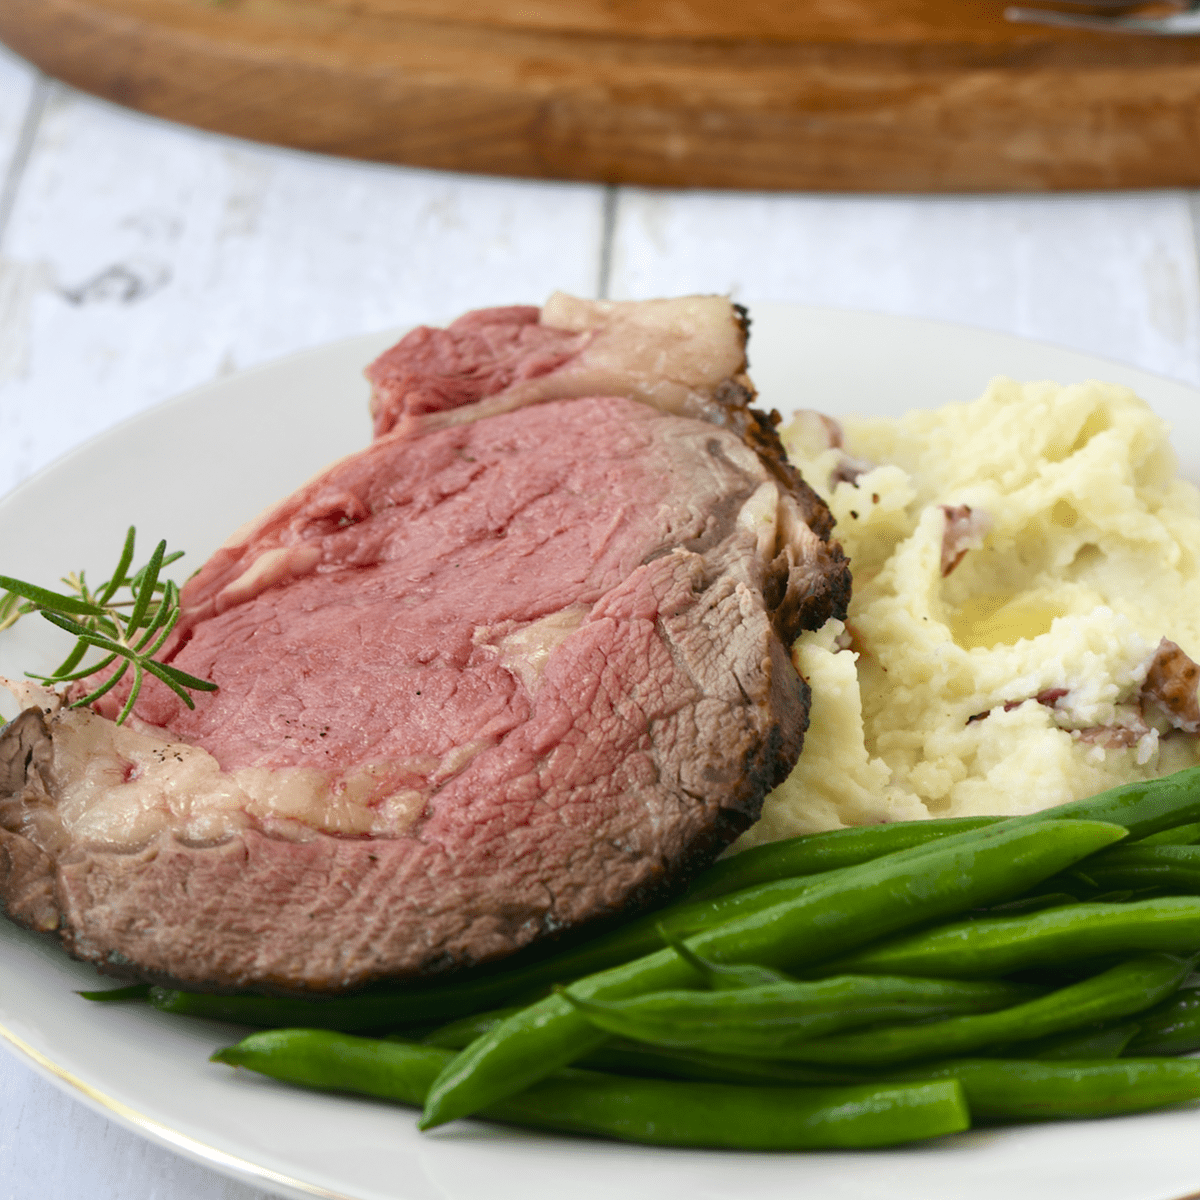 Slice of ribeye roast prime rib steak on white plate with green beans and mashed potatoes.